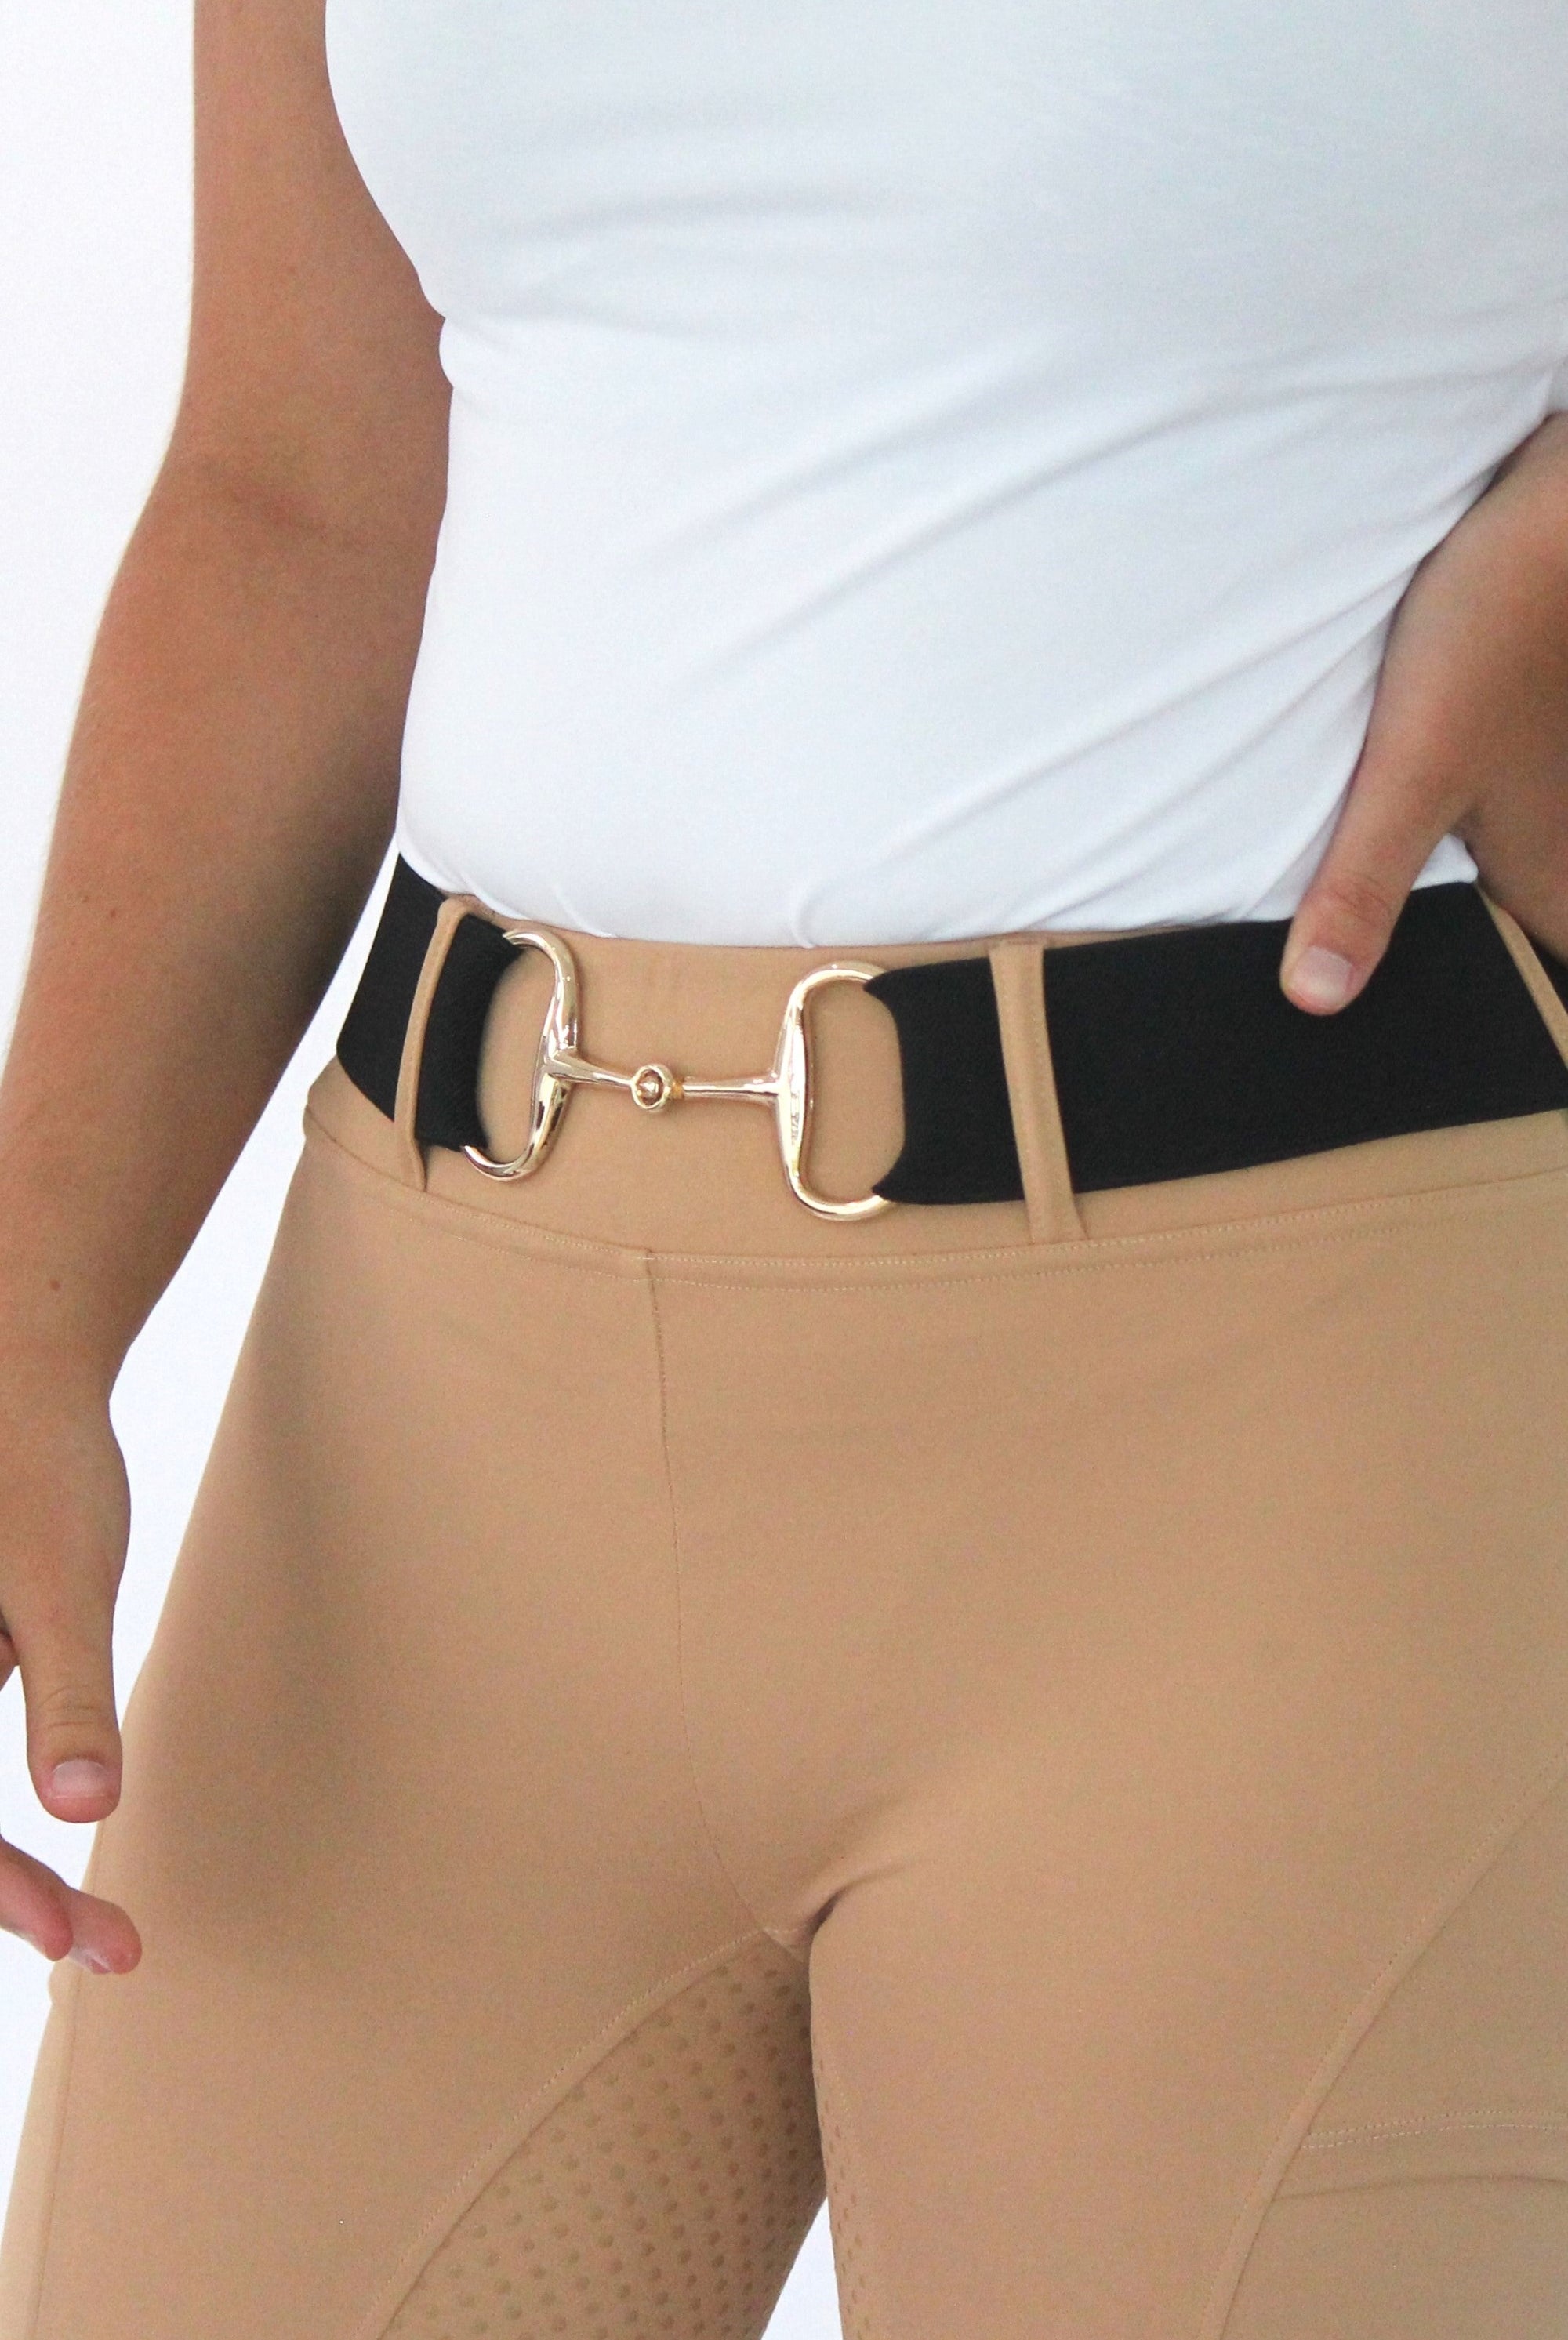 A person wearing tan colored riding pants with a black belt that has a gold horse bit buckle, offering ultimate comfort. Their top is white and tucked into the pants. The person's left hand is resting on their hip, showcasing the adjustable fit of The Snaffle Belt by Pure Canter against a plain white background.